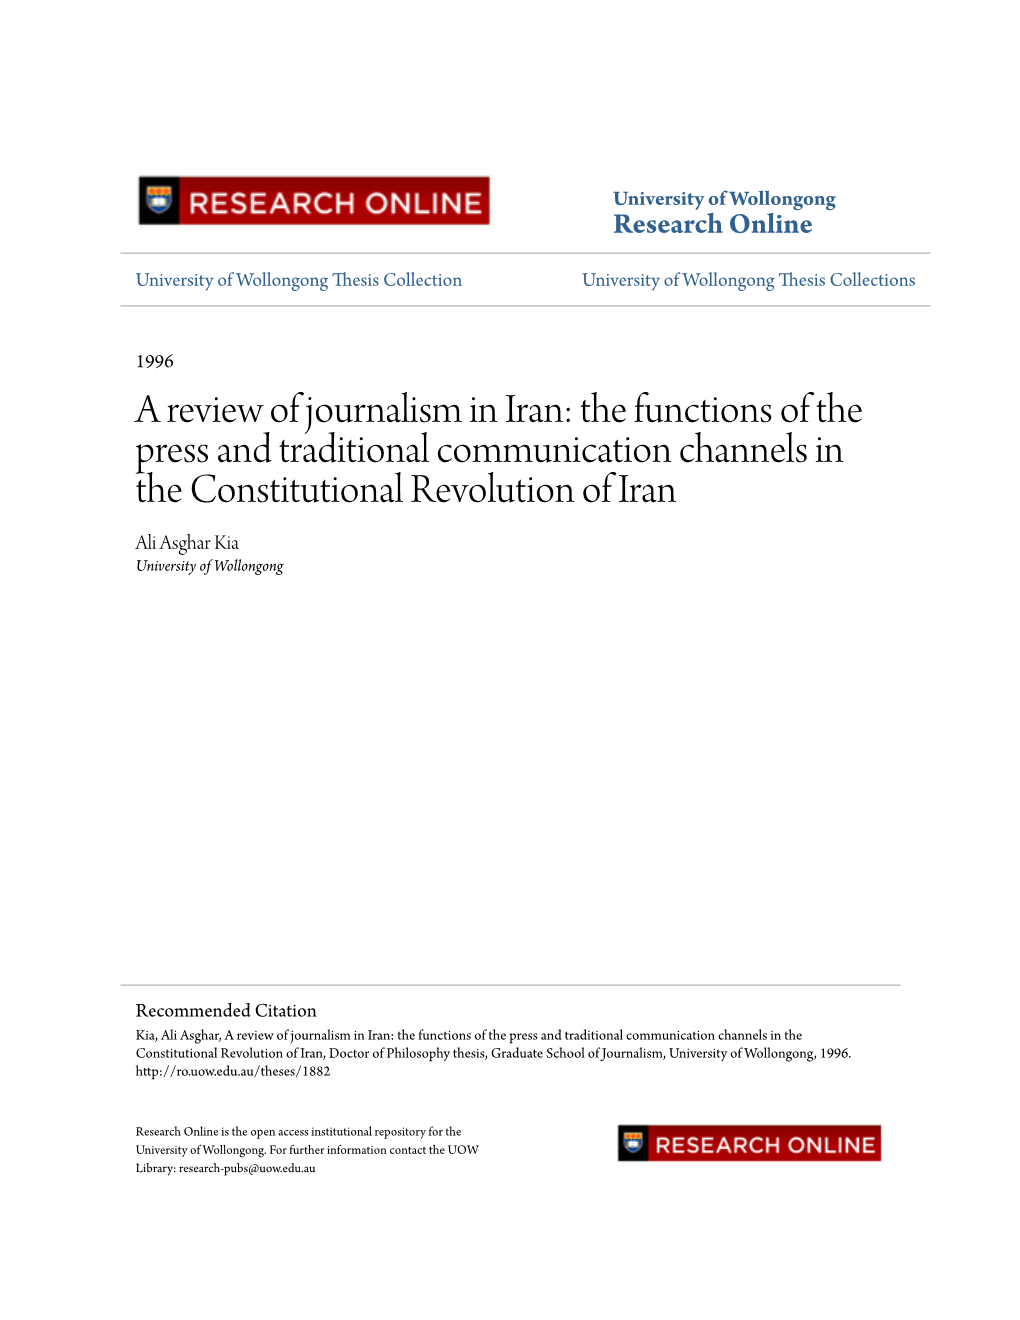 A Review of Journalism in Iran